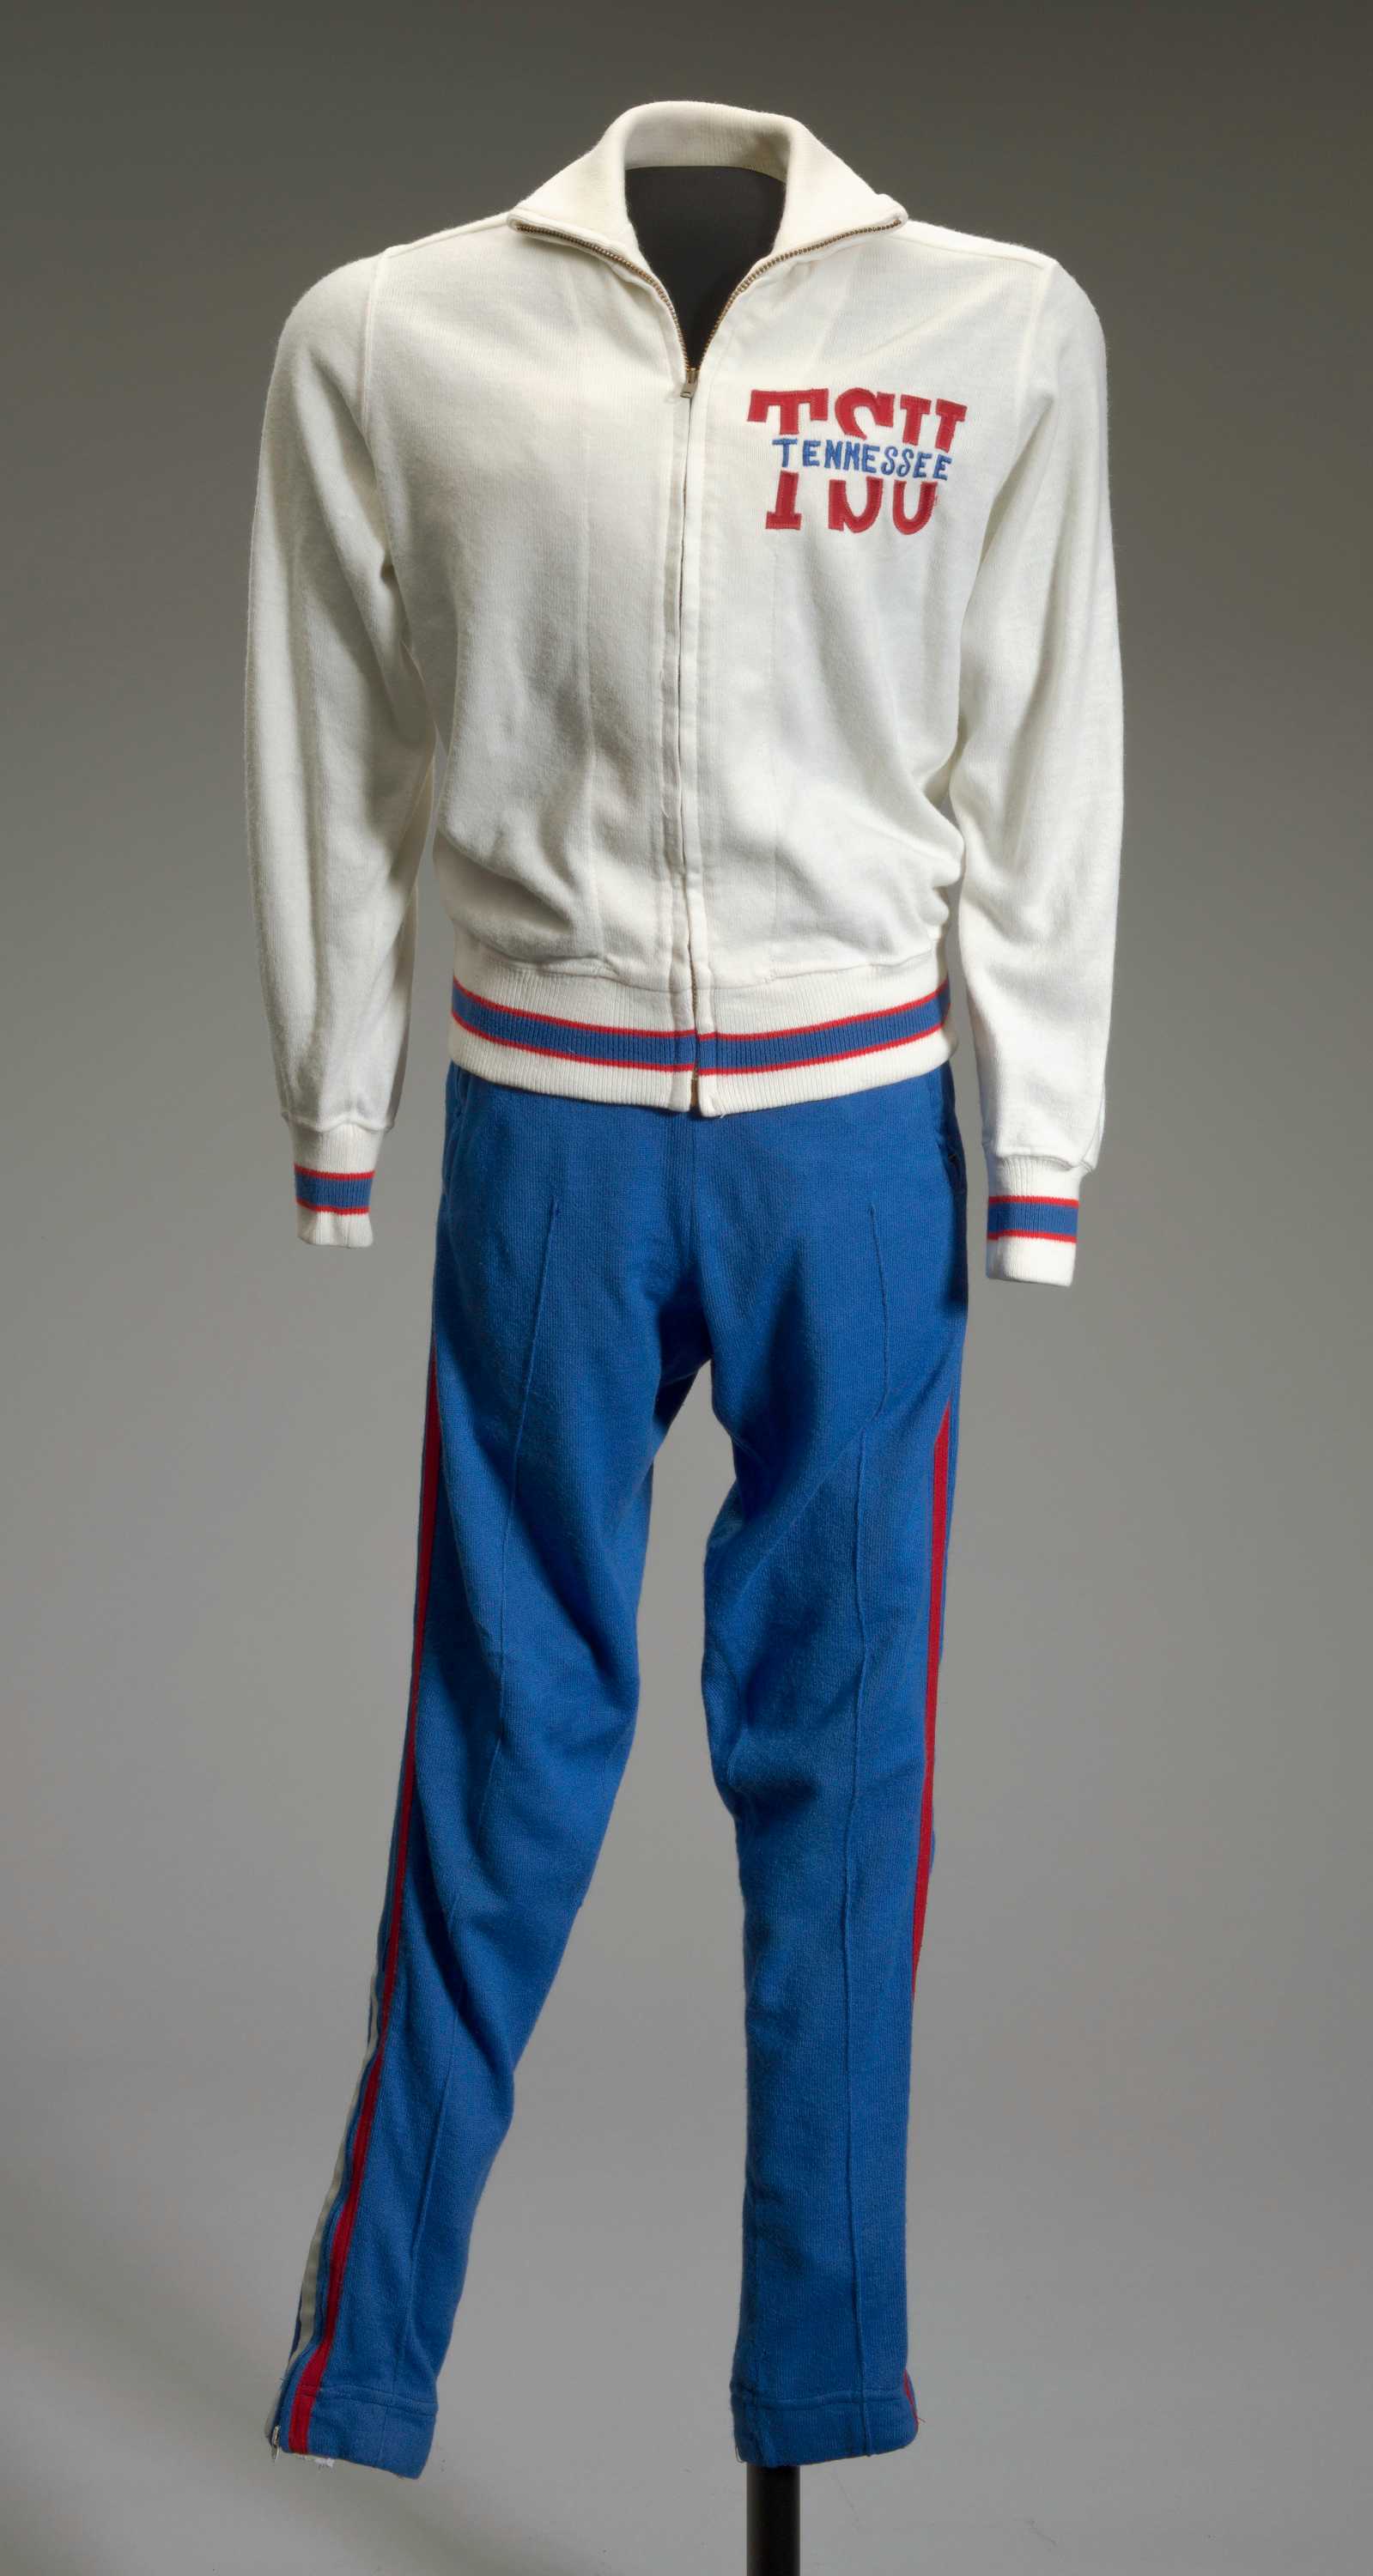 A jacket and pair of pants that are a two-piece warm-up track suit for the Tennessee State University Women's track team, the Tigerbelles, worn by Chandra Cheeseborough.